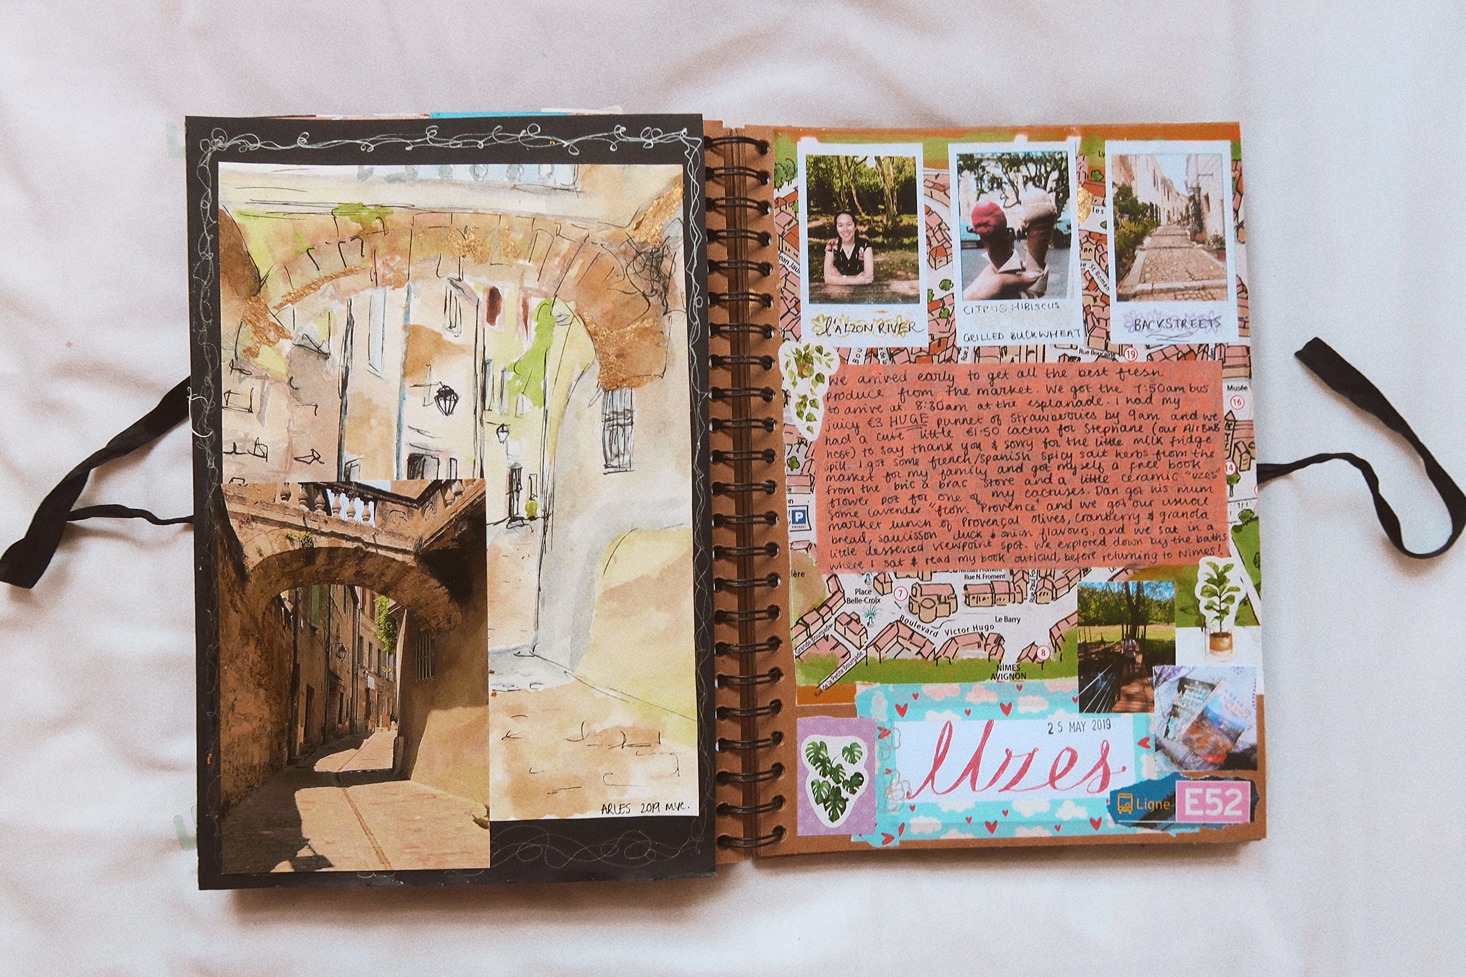 An open scrapbook sits on a white background. On the left page is a photo and a watercolor painting of a stone, pedestrian street. On the right are three polaroid pictures and a variety of stickers, writings, and other paper-based cutouts.